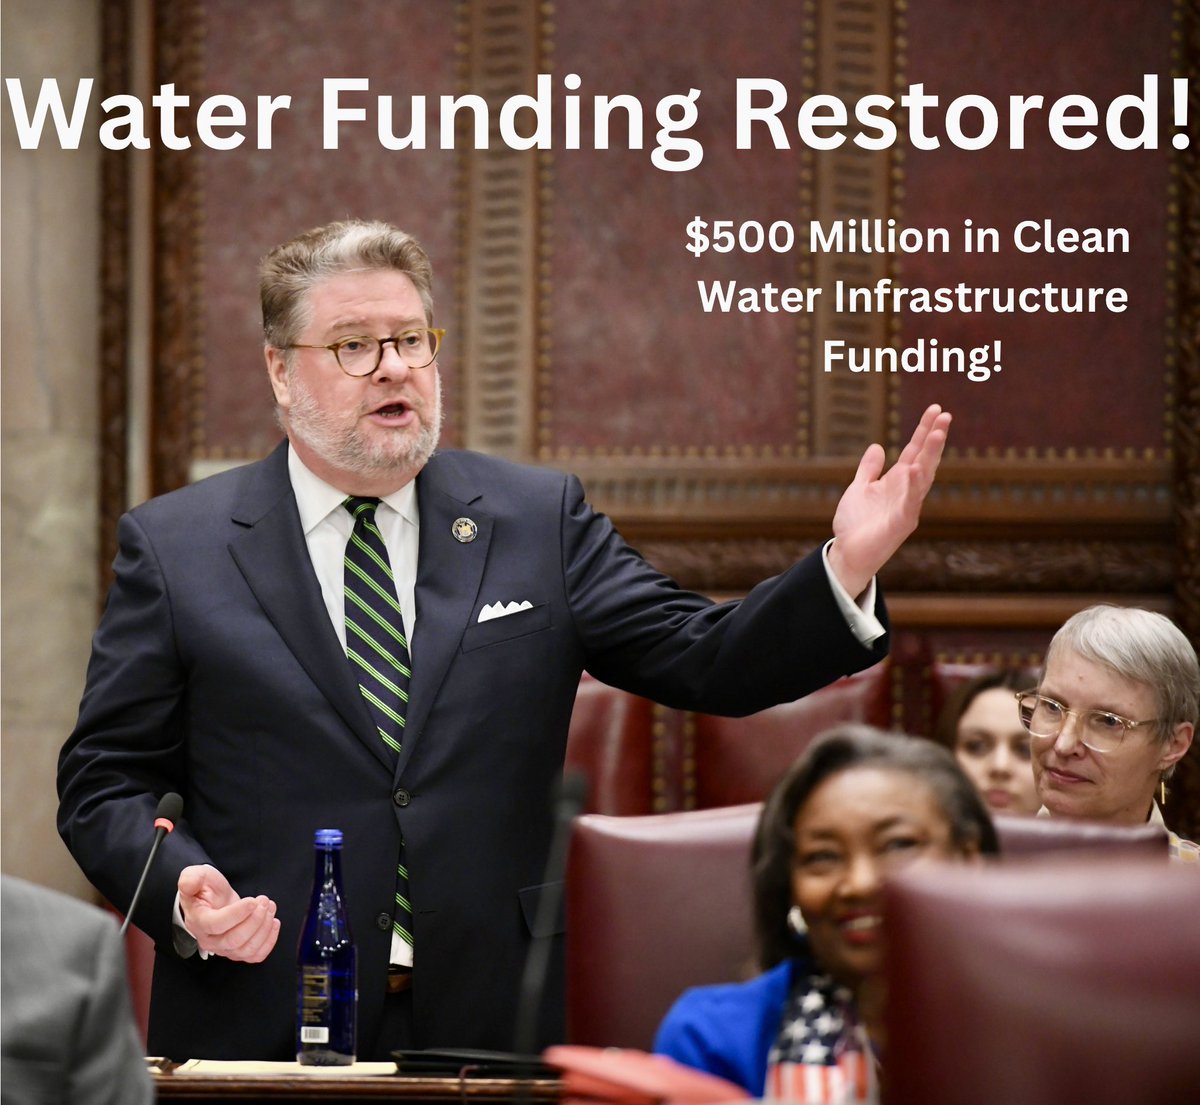 The budget is passed and it’s official! Water infrastructure funding is completely restored in the FY2024-25 Budget!  This is a big win! Thank you to all of the advocates for their steadfast support to make this happen.